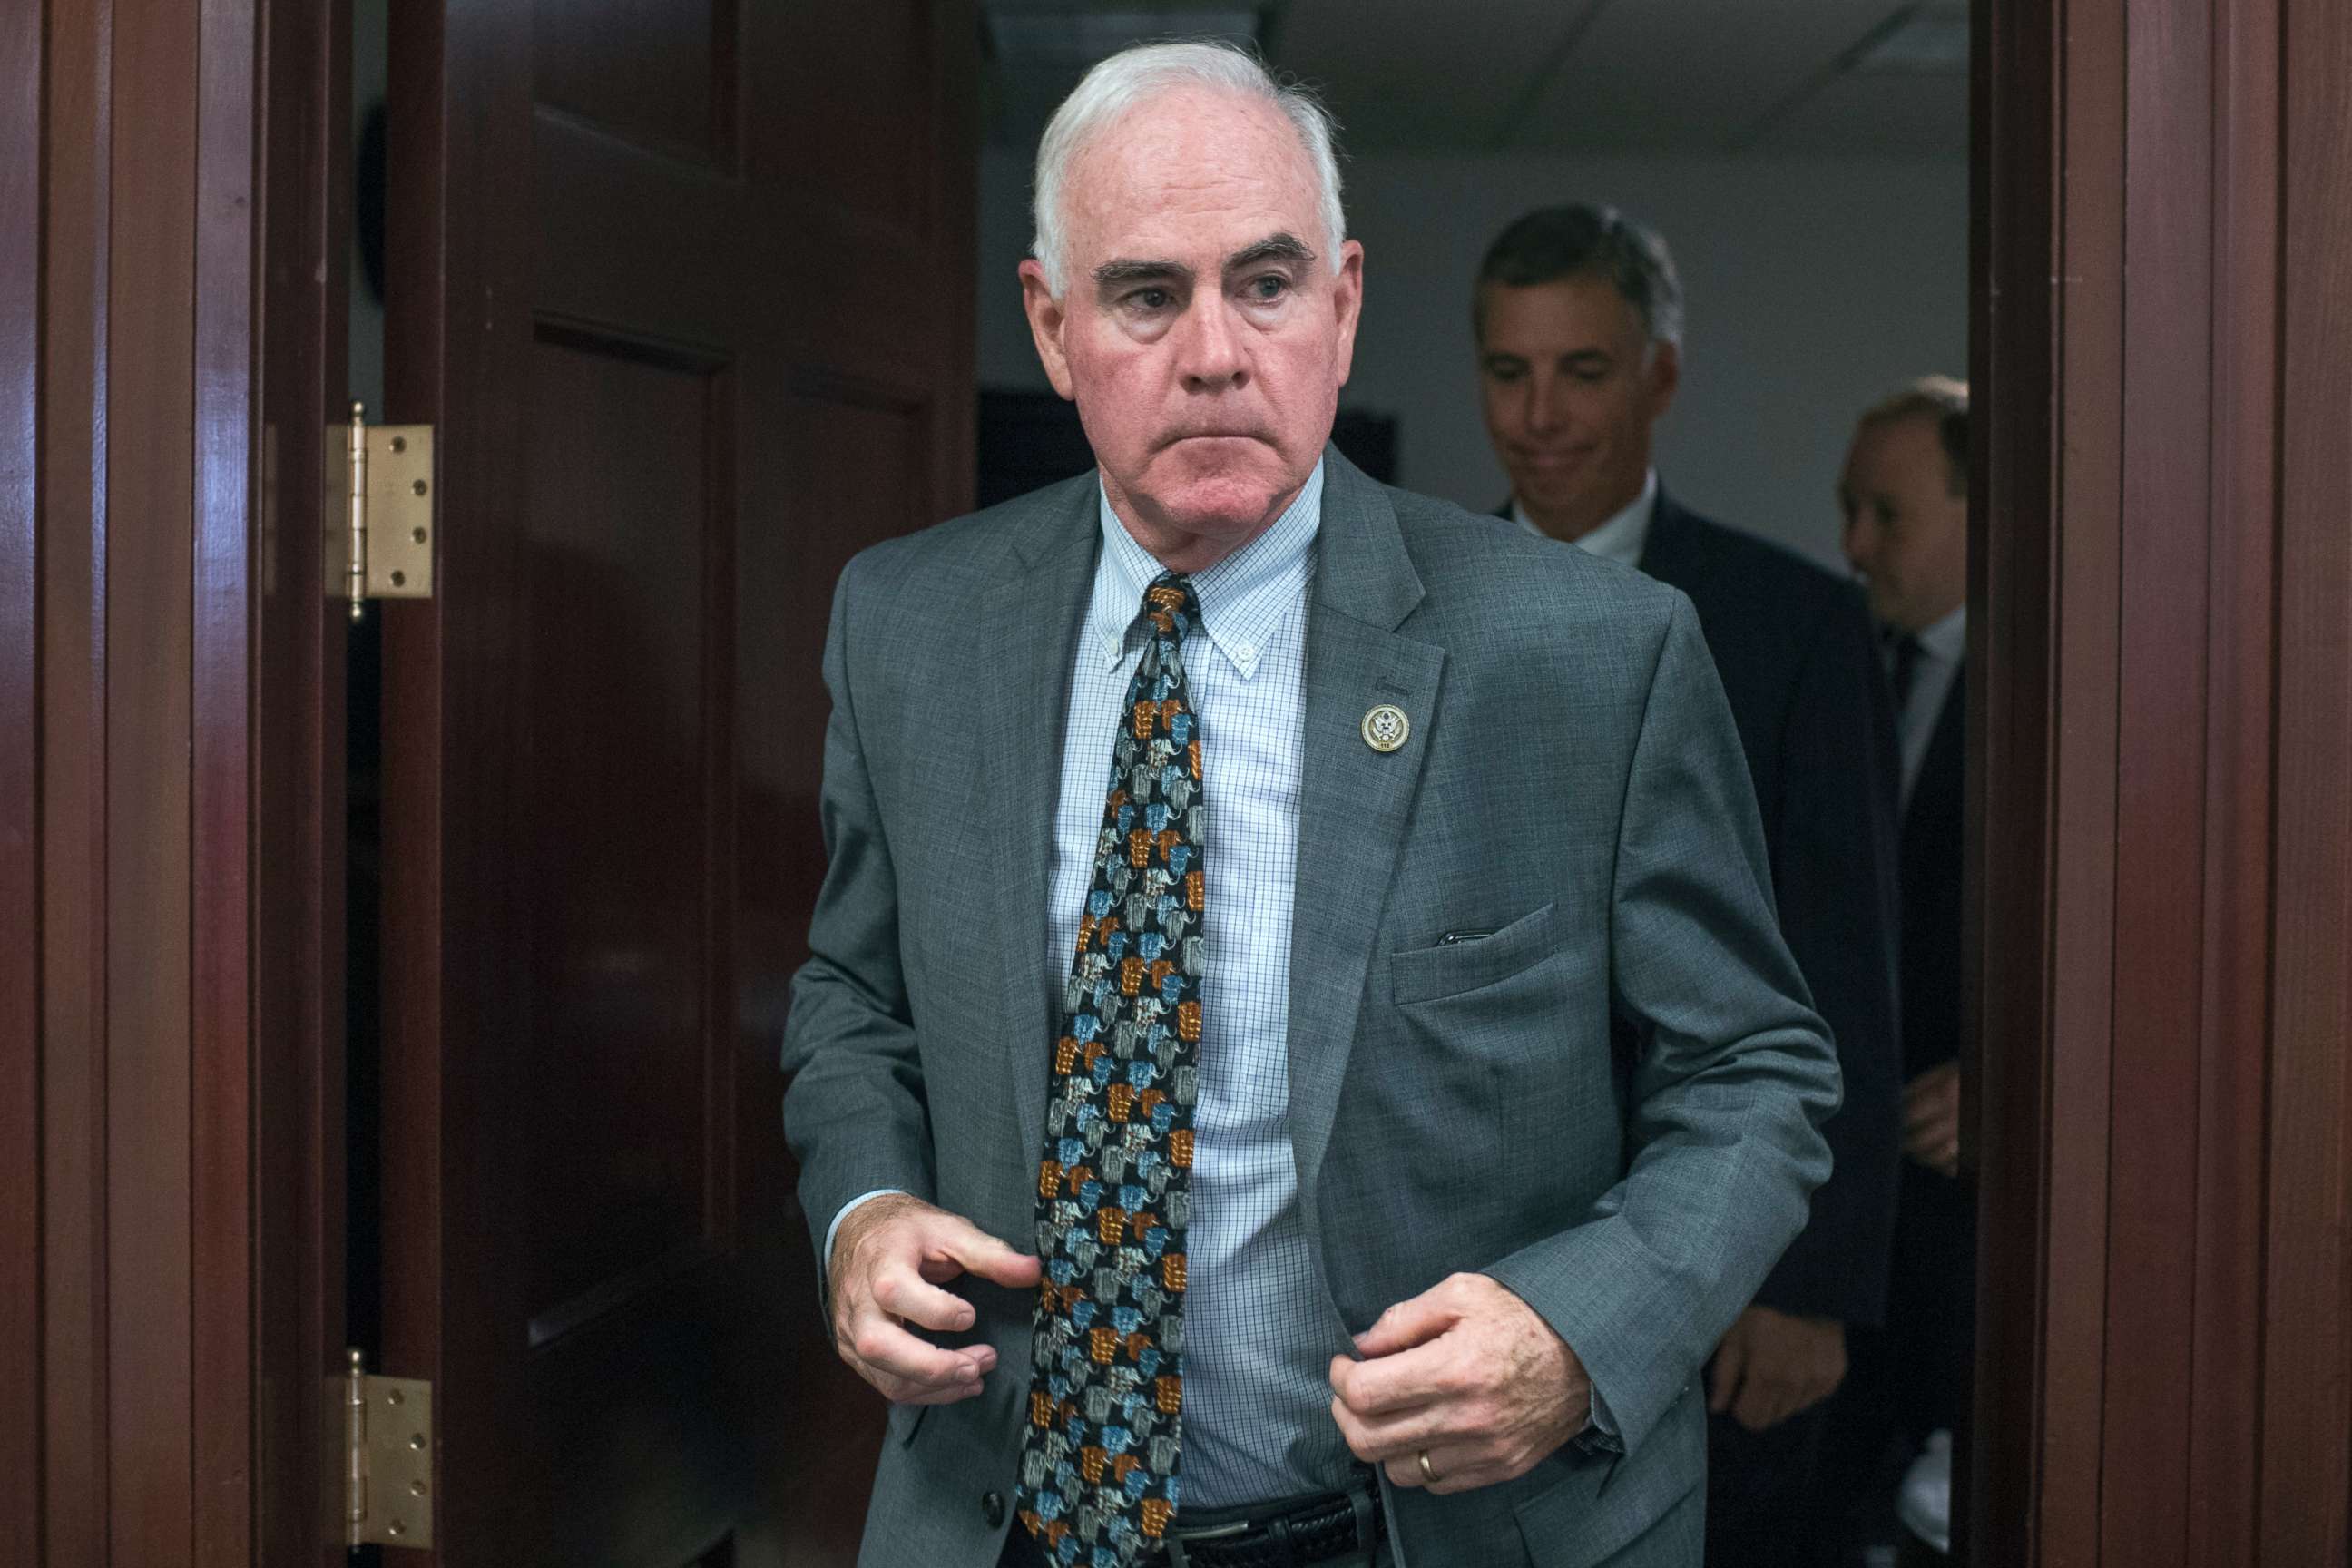 PHOTO: Rep. Patrick Meehan leaves a meeting of the House Republican Conference at the Capitol, June 21, 2017, in Washington, D.C. 